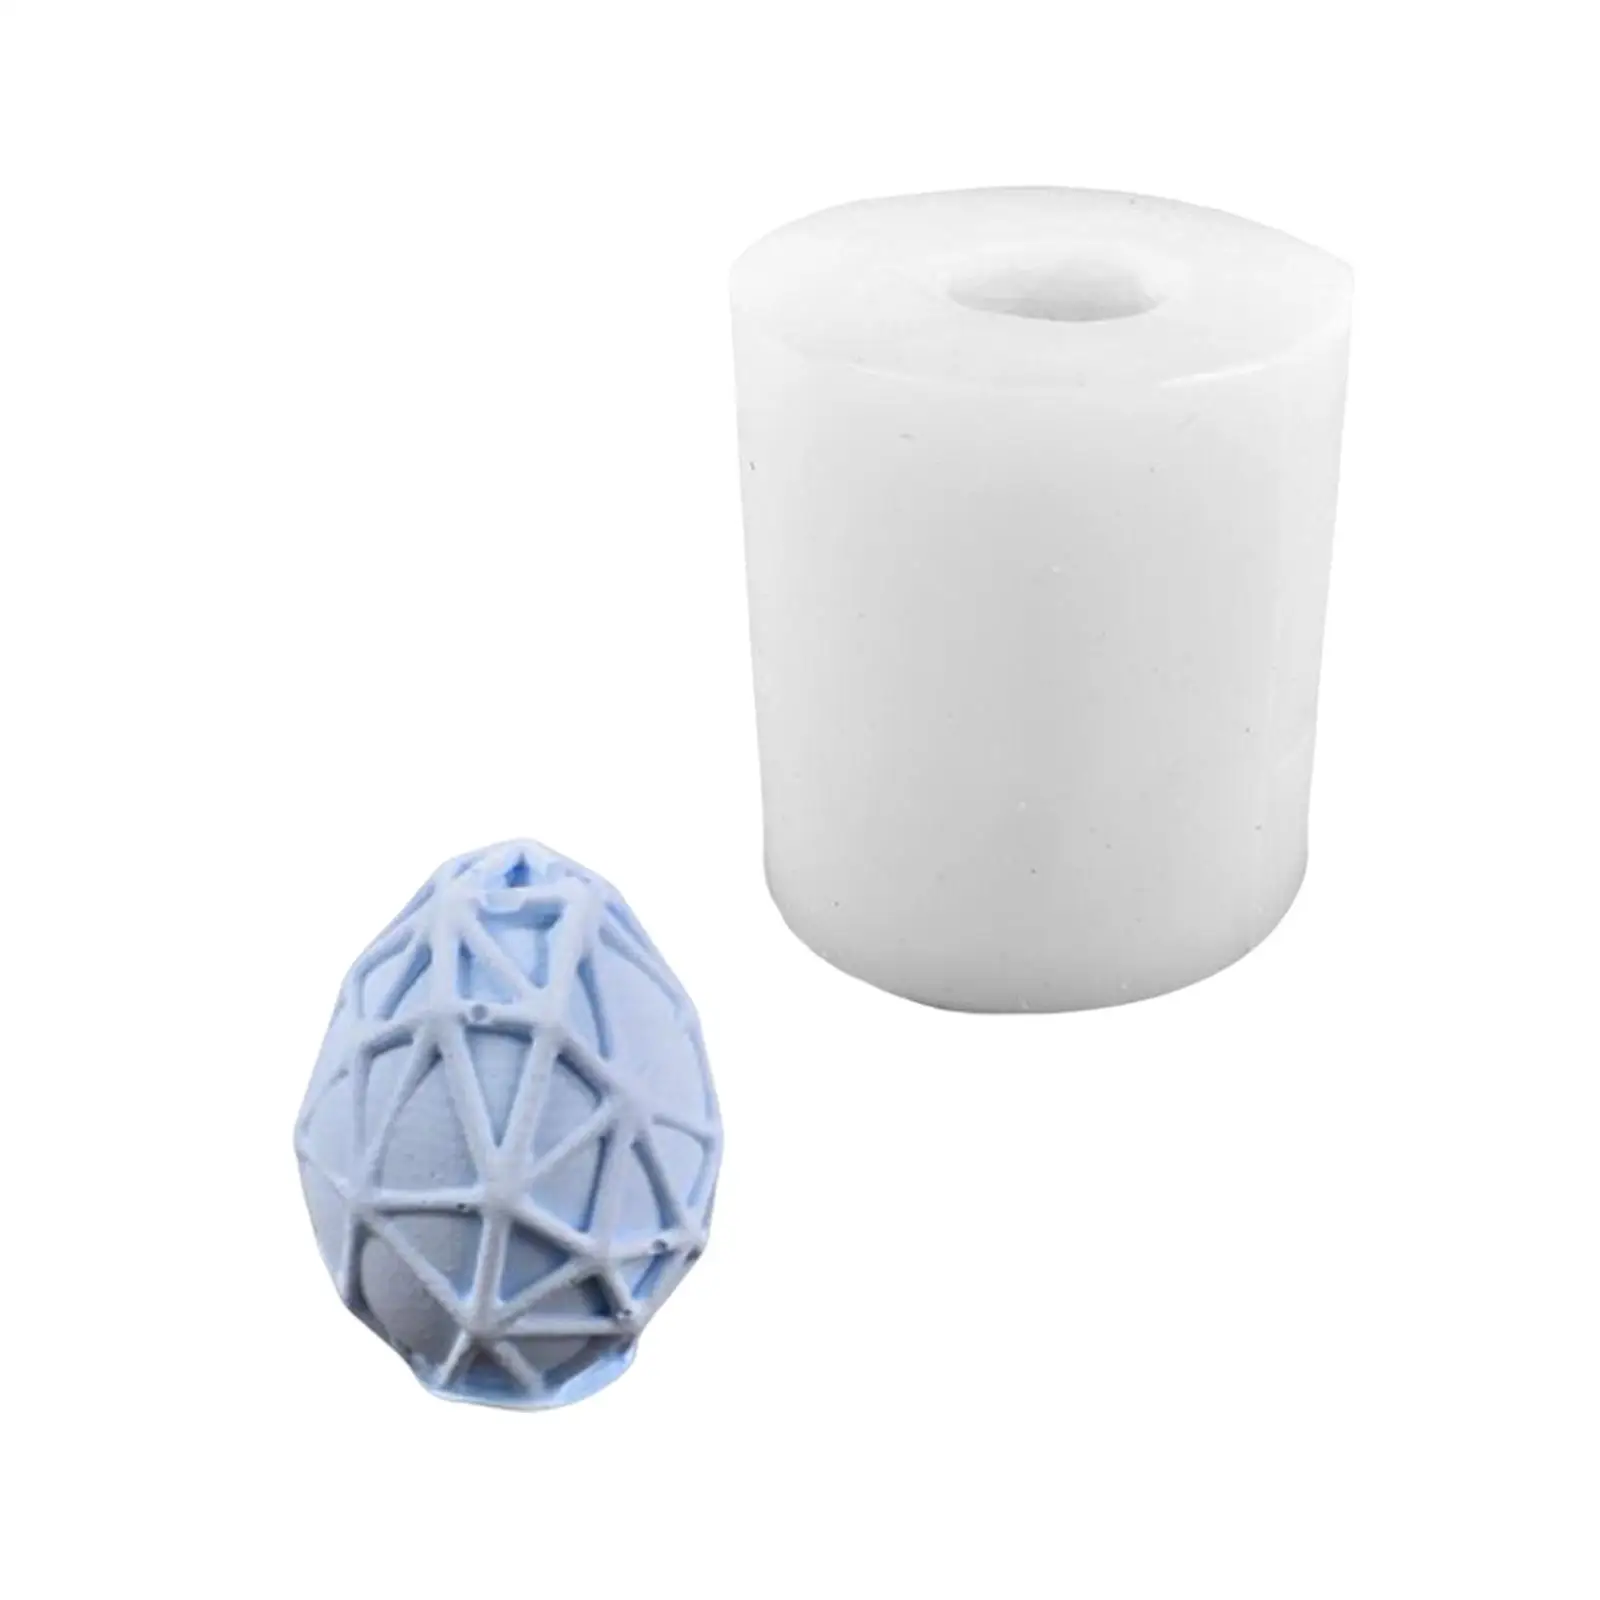 3D Easter Eggs Casting Model DIY Handcraft Sculpture Tools Decoration Silicone Candle Casting for Professionals